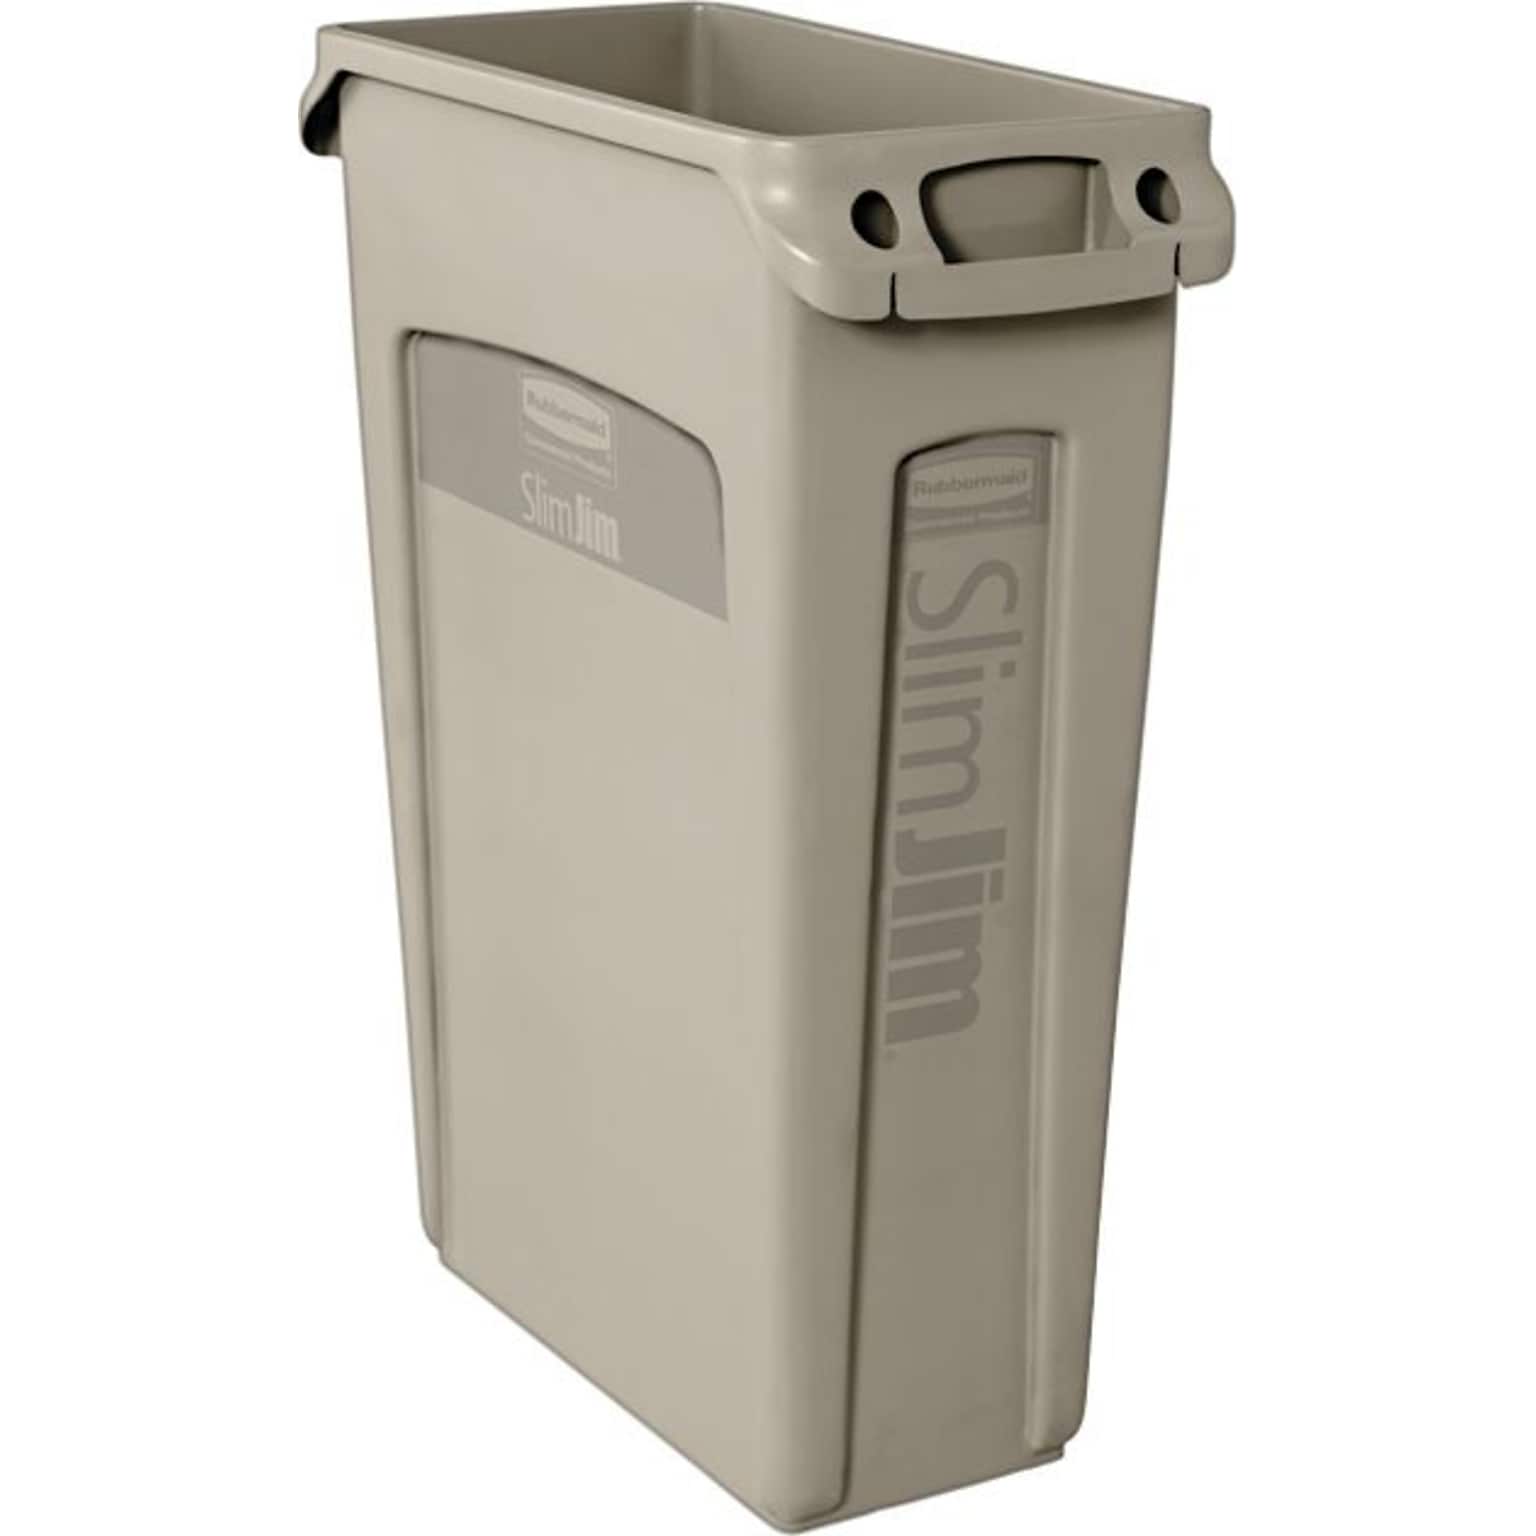 Rubbermaid Slim Jim Rectangular Trash Can Receptacle with Venting Channels, 23 Gallons, Beige (FG354060BEIG)